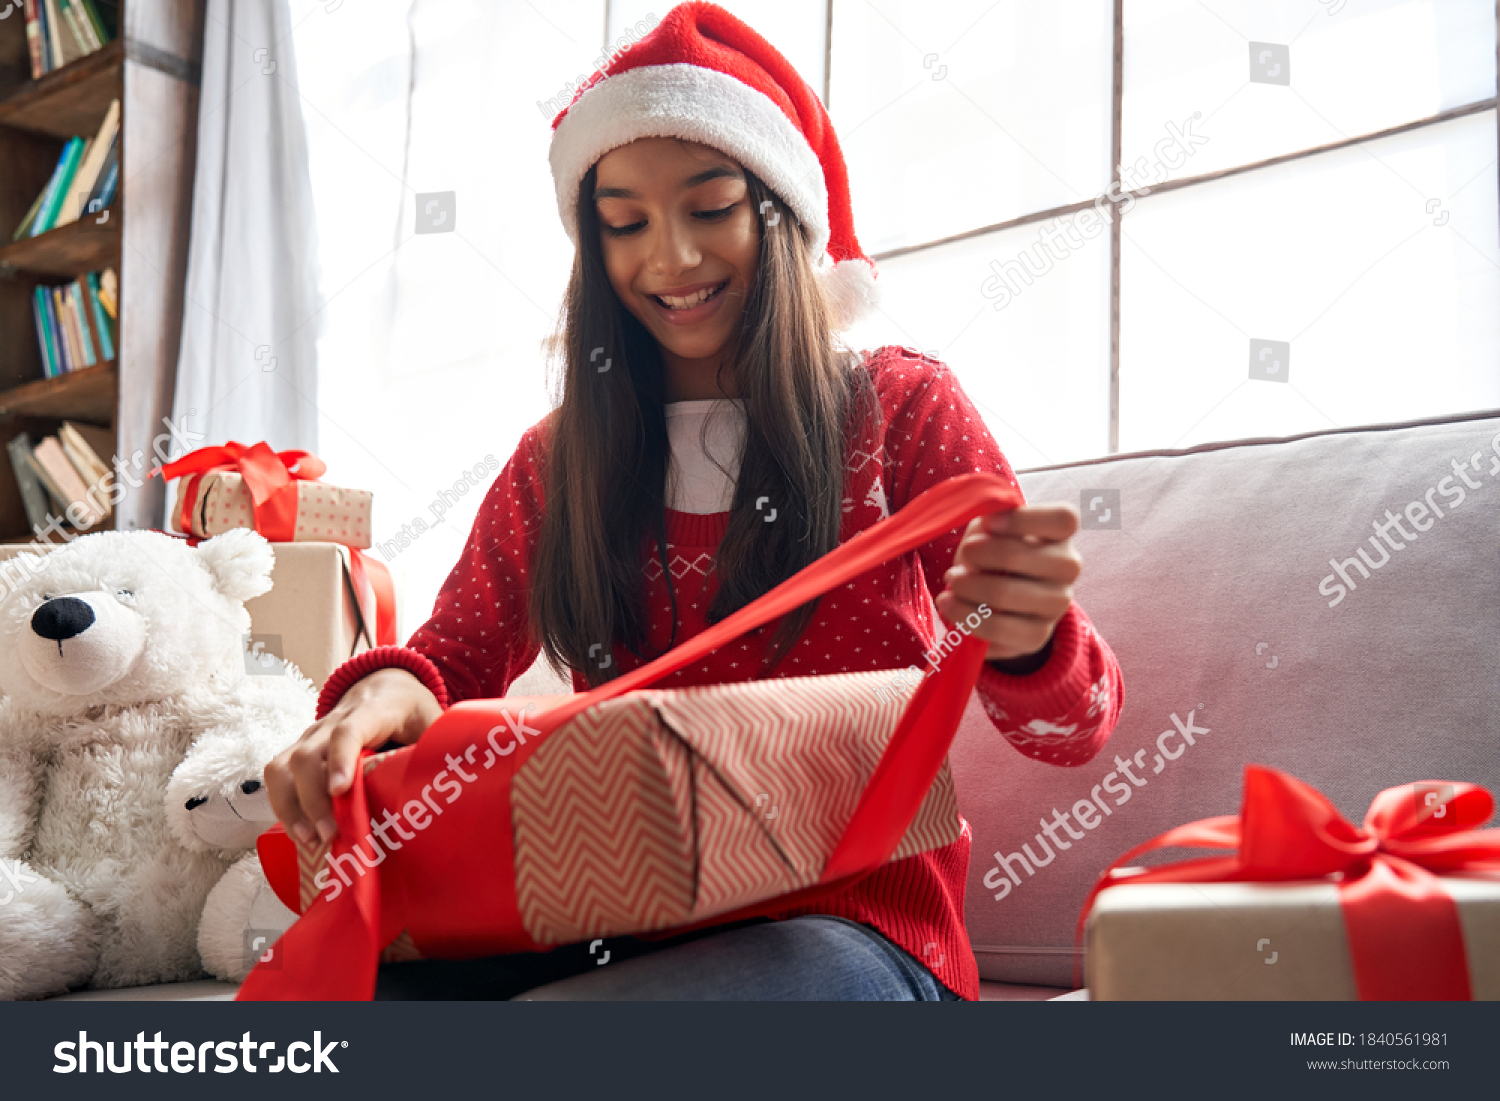 Happy indian kid girl unties red ribbon opens Christmas gift box at home. Smiling cute latin child wearing santa hat receiving xmas New Year present sitting on couch celebrating winter holidays. #1840561981